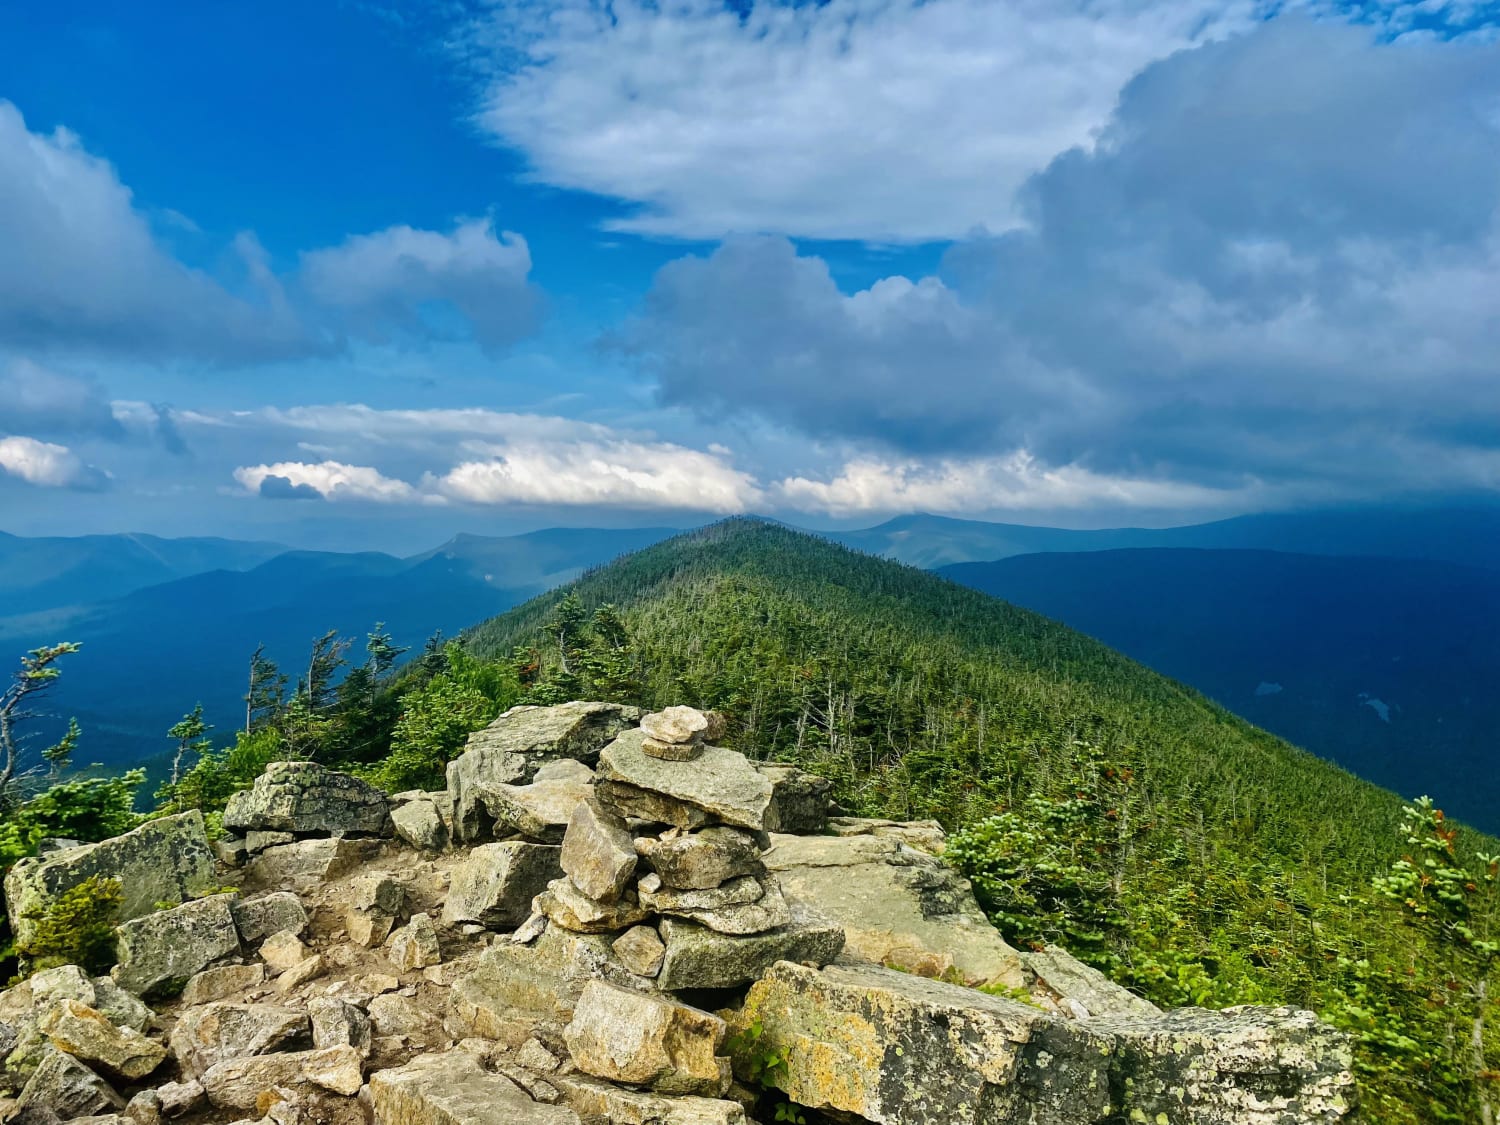 West Bond and The Pemigewasset Wilderness, White Mountains National Forest, New Hampshire